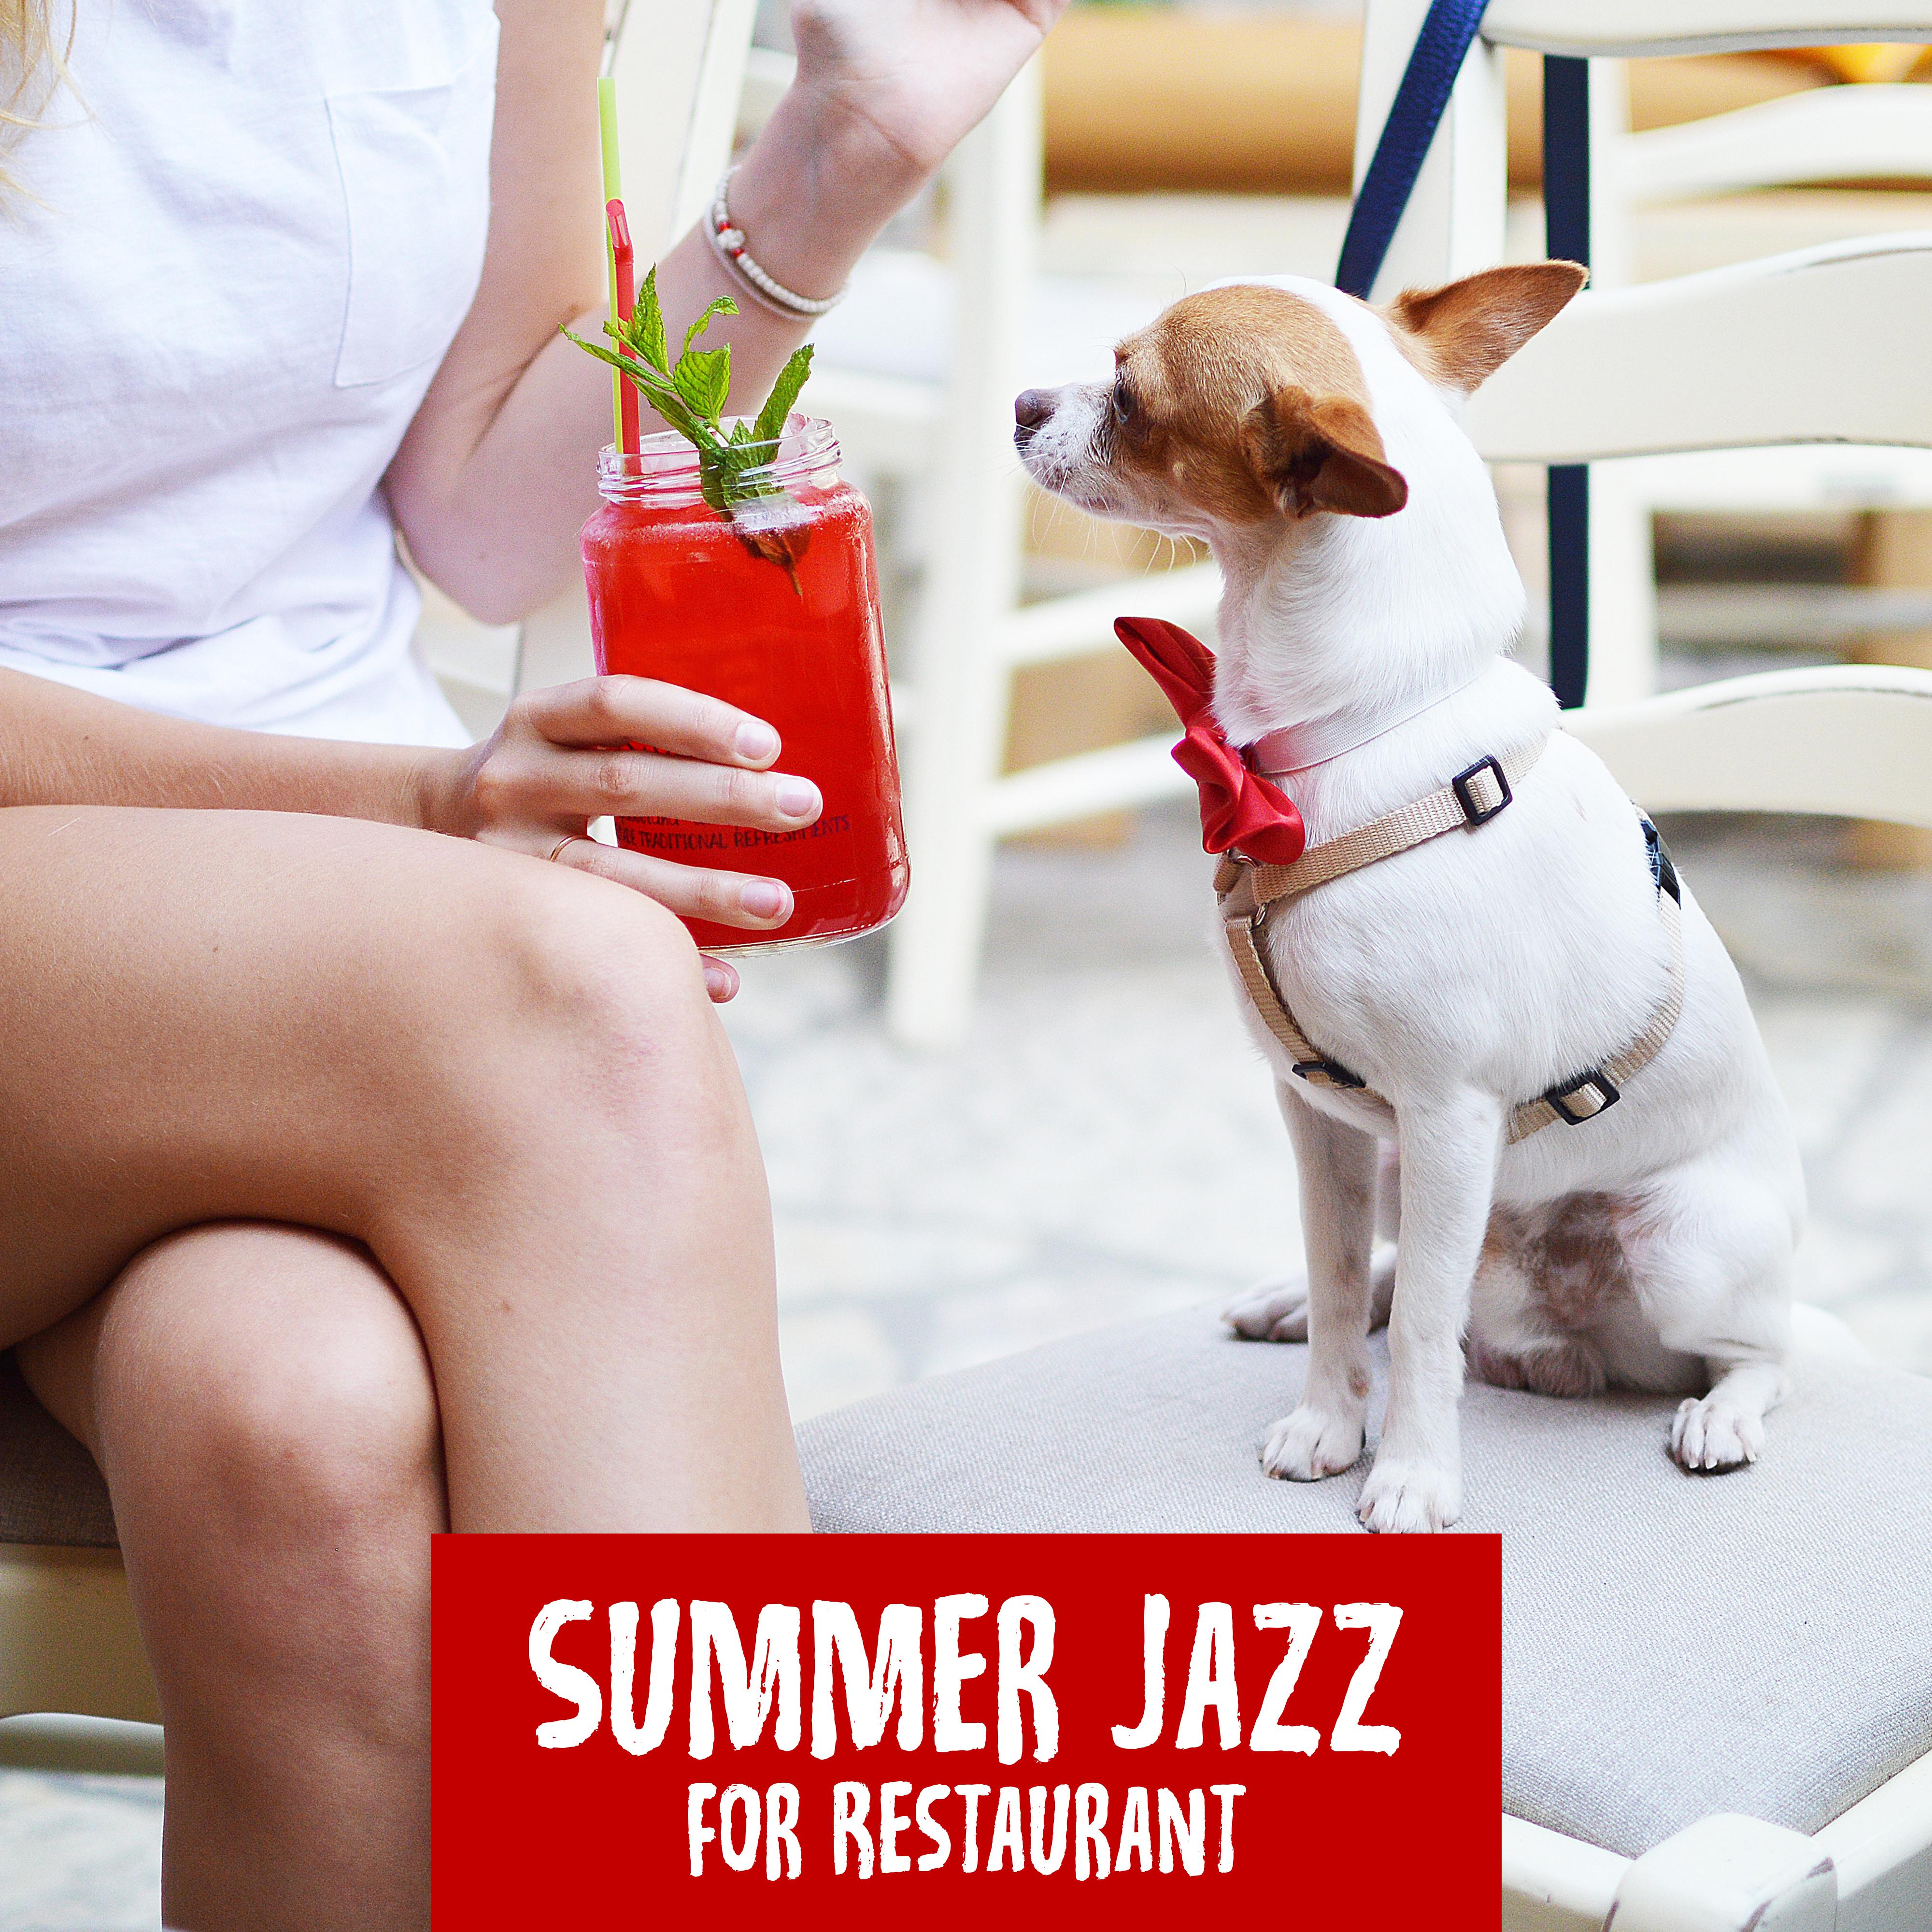 Summer Jazz for Restaurant: Jazz Coffee, Ambient Chill, Dinner Songs for Relaxation, Sunny Jazz Moments, Instrumental Jazz Music Ambient, Restaurant Jazz 2019